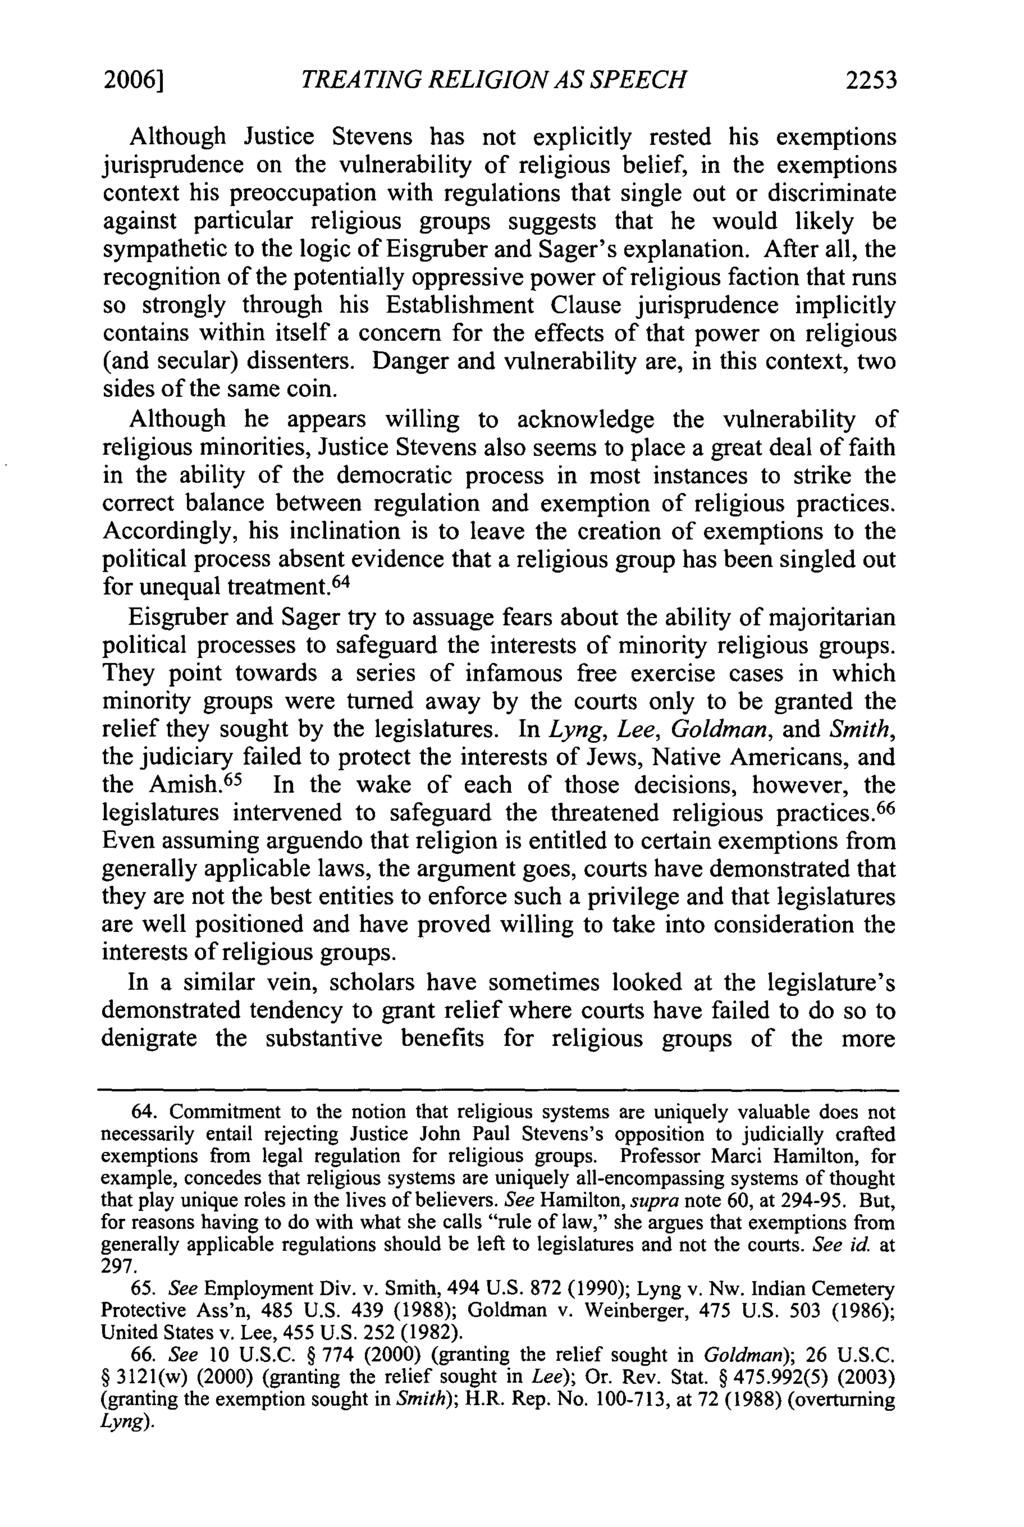 2006] TREA TING RELIGION AS SPEECH 2253 Although Justice Stevens has not explicitly rested his exemptions jurisprudence on the vulnerability of religious belief, in the exemptions context his